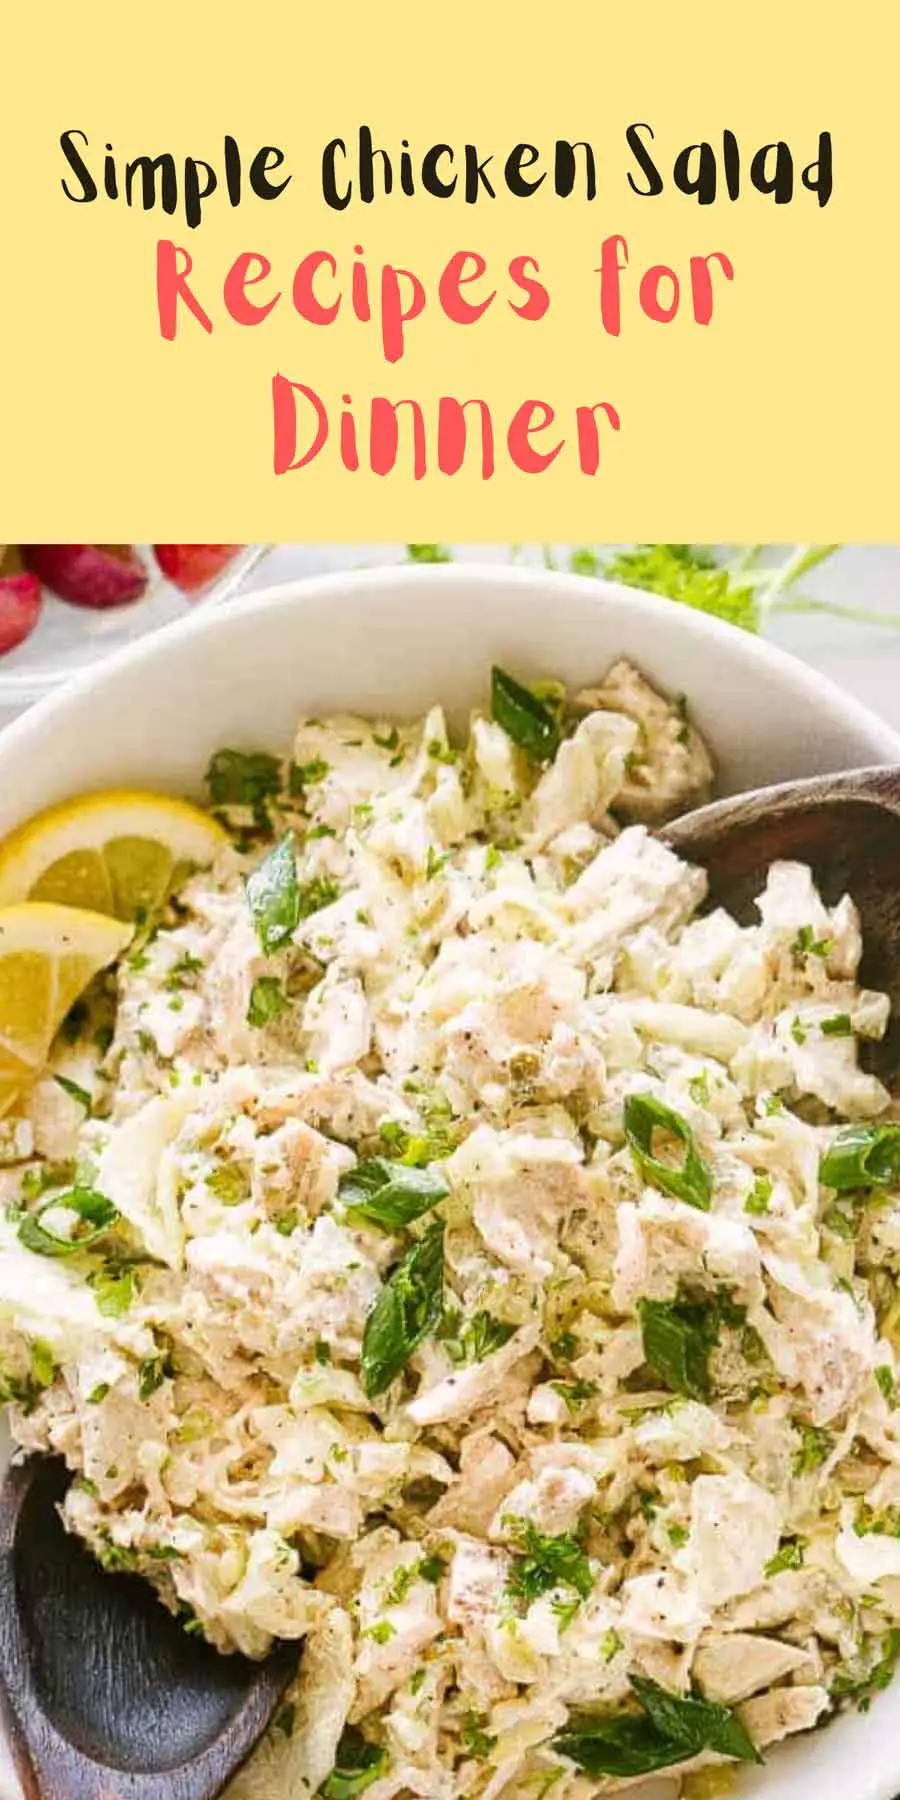 Salad Recipes For Dinner Chicken Simple